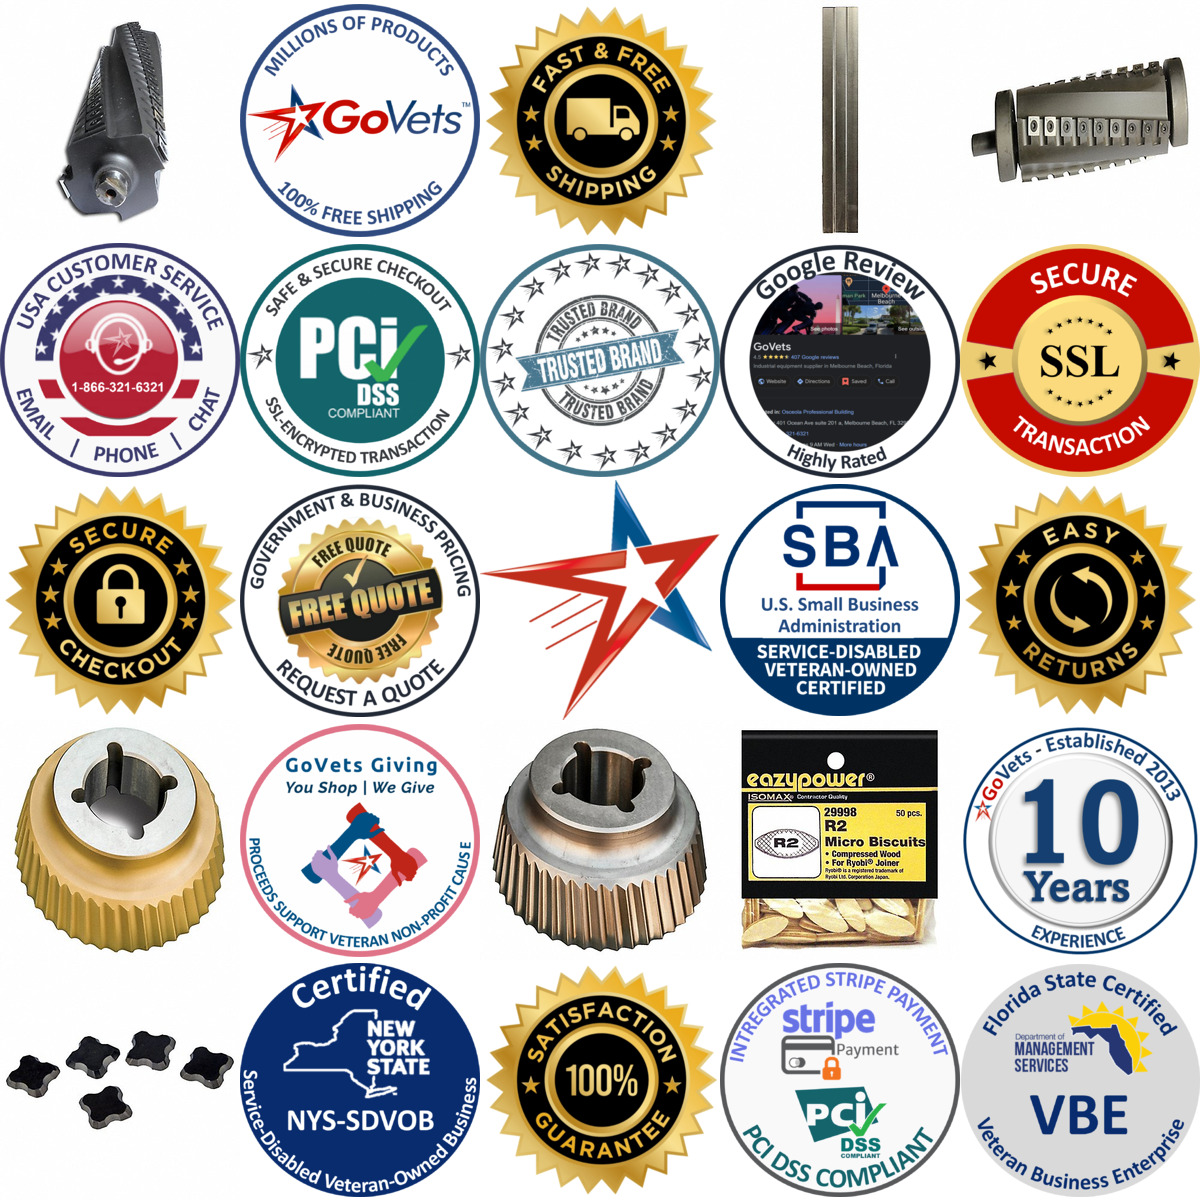 A selection of Plate Joiner Accessories products on GoVets